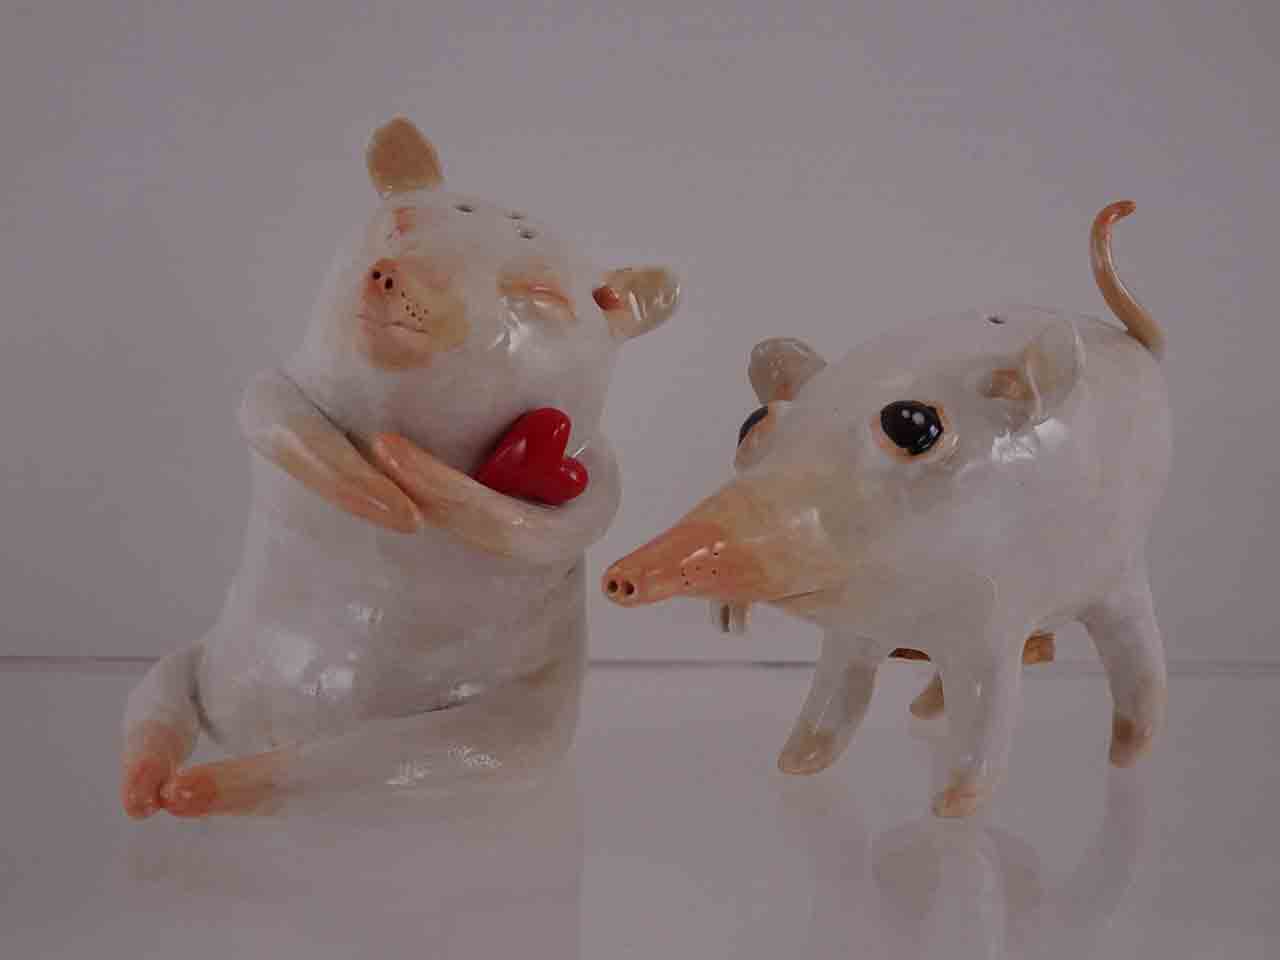 Mice salt and pepper shakers by Agata / Matylda Ceramics from Poland